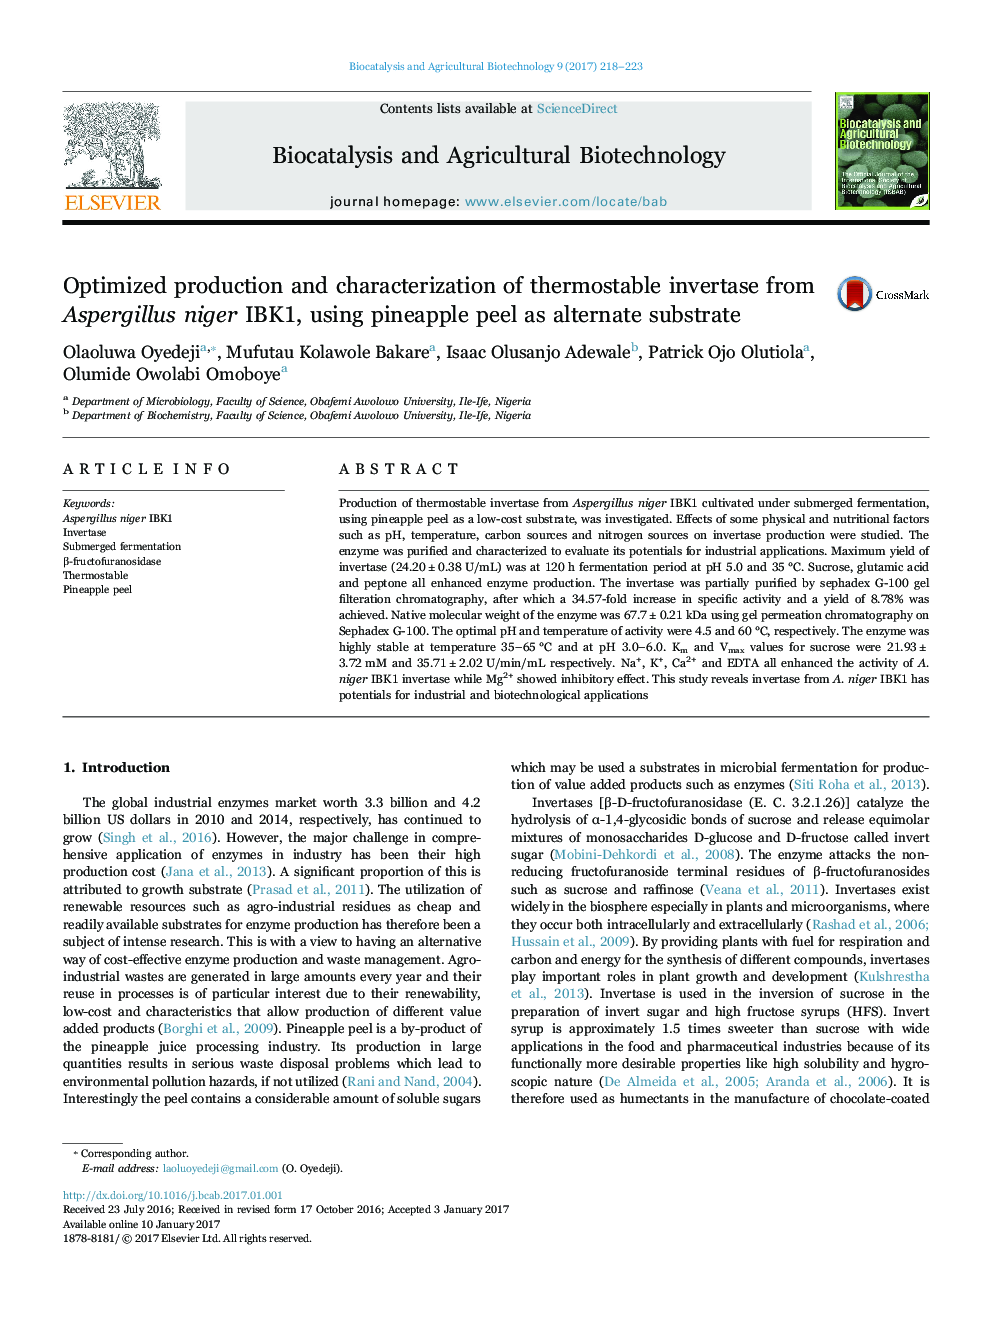 Optimized production and characterization of thermostable invertase from Aspergillus niger IBK1, using pineapple peel as alternate substrate